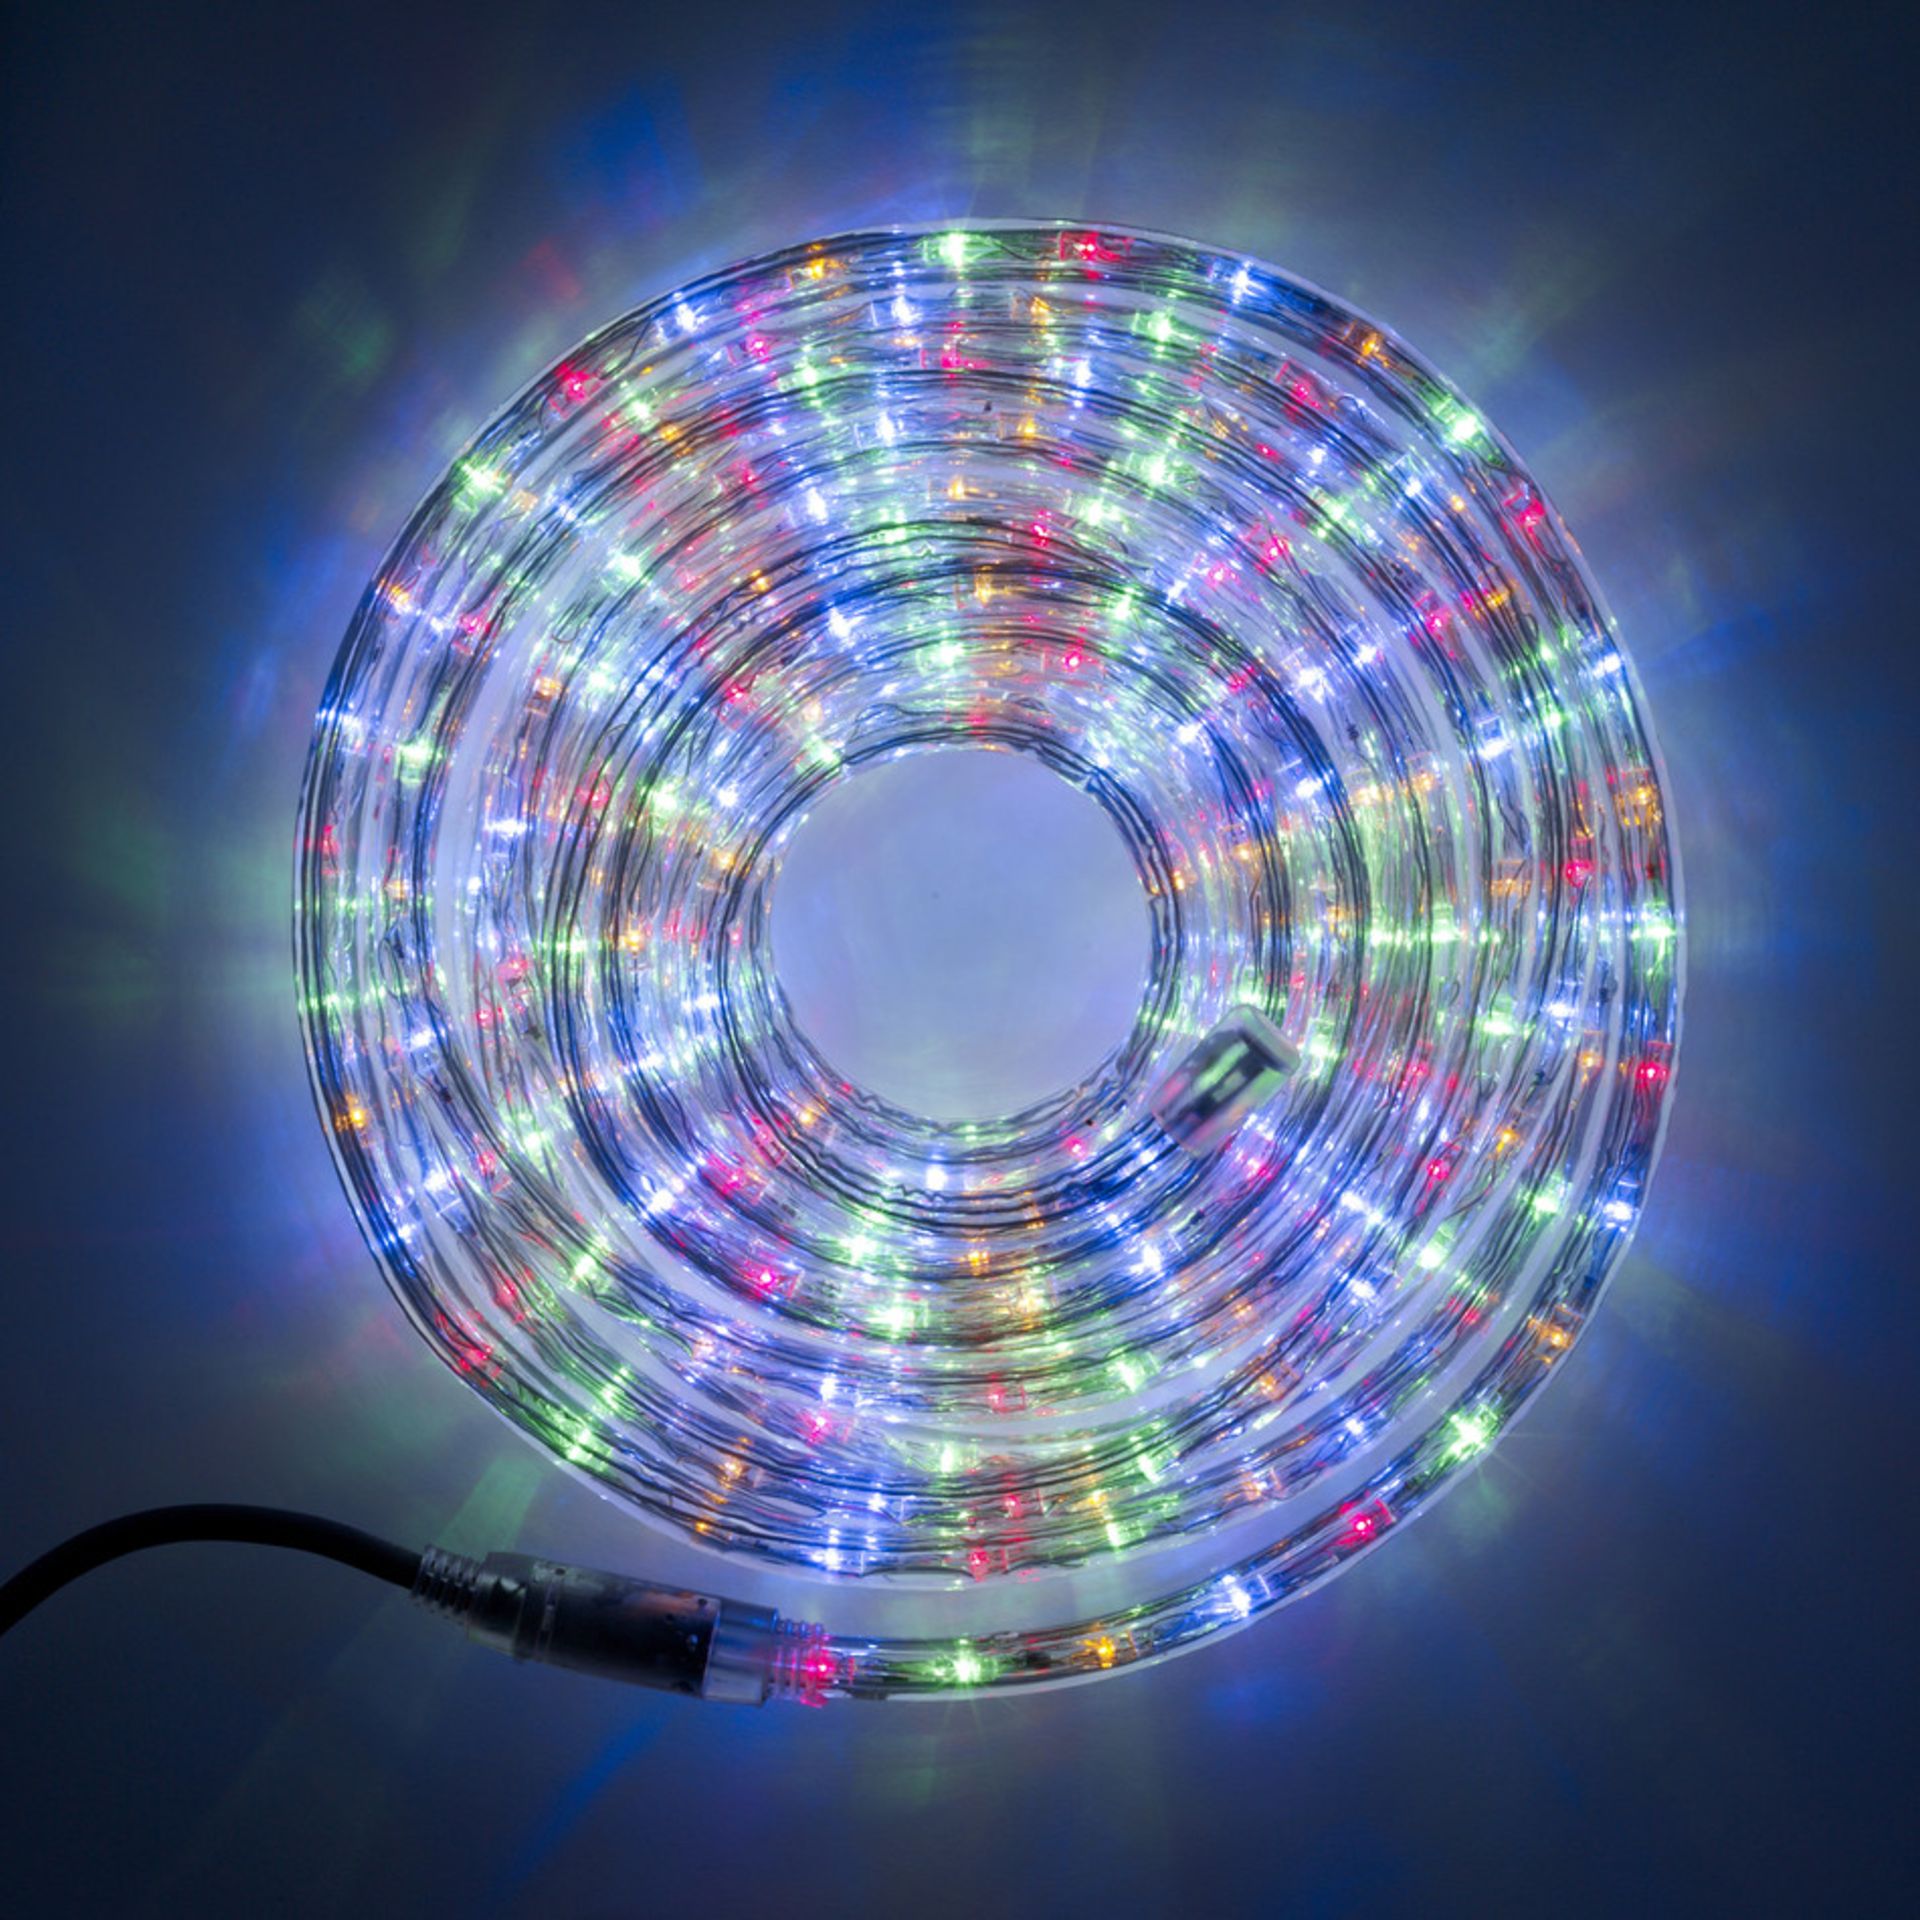 V Brand New 5M Multi-Coloured LED Rope Light - 8 Functions - Indoor & Outdoor Use - Online Price £ - Image 2 of 2